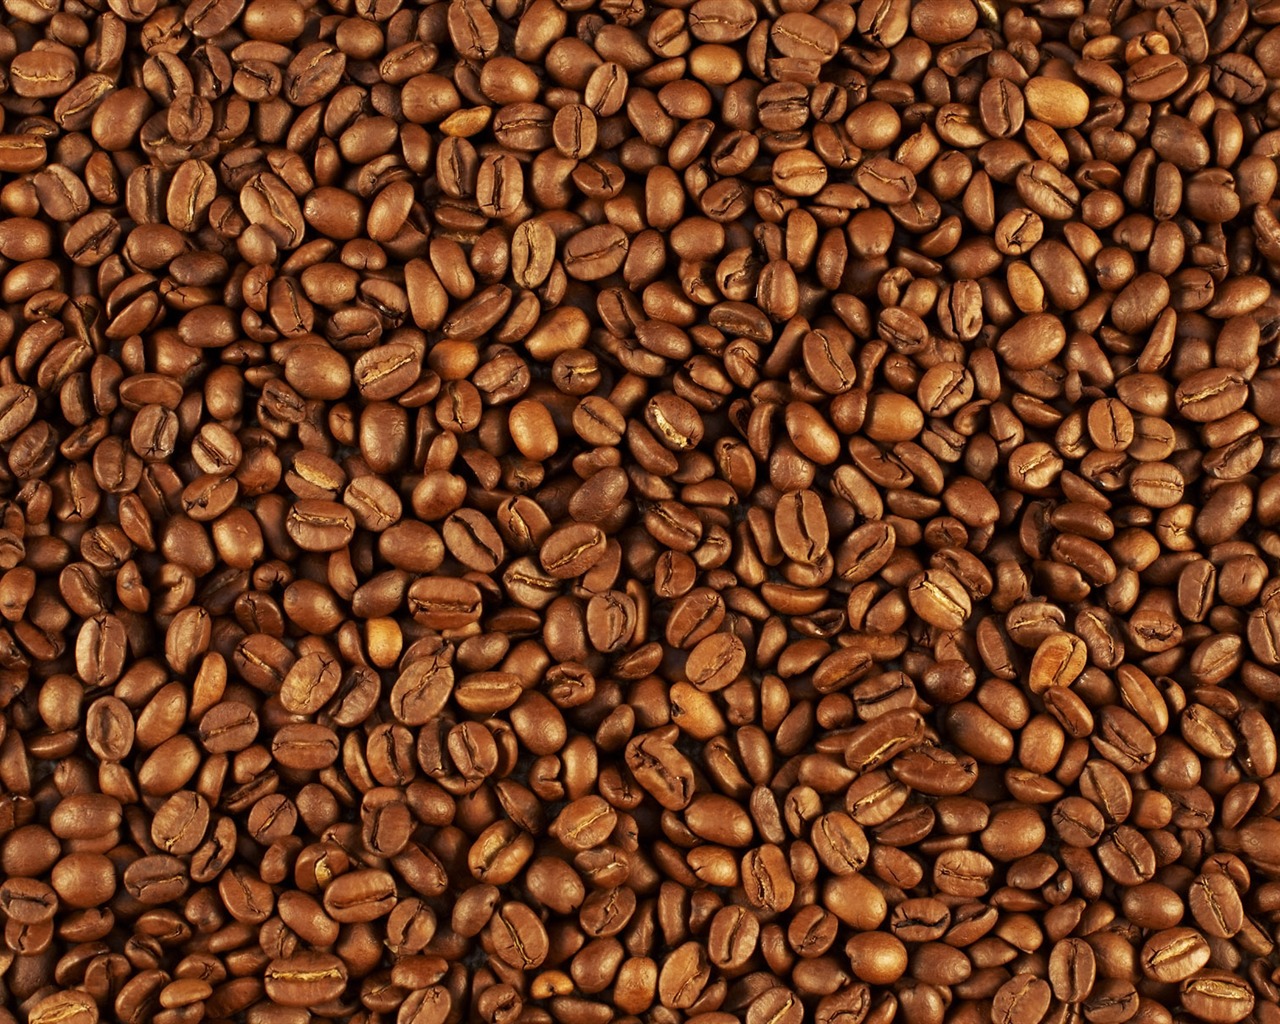 Coffee feature wallpaper (7) #16 - 1280x1024